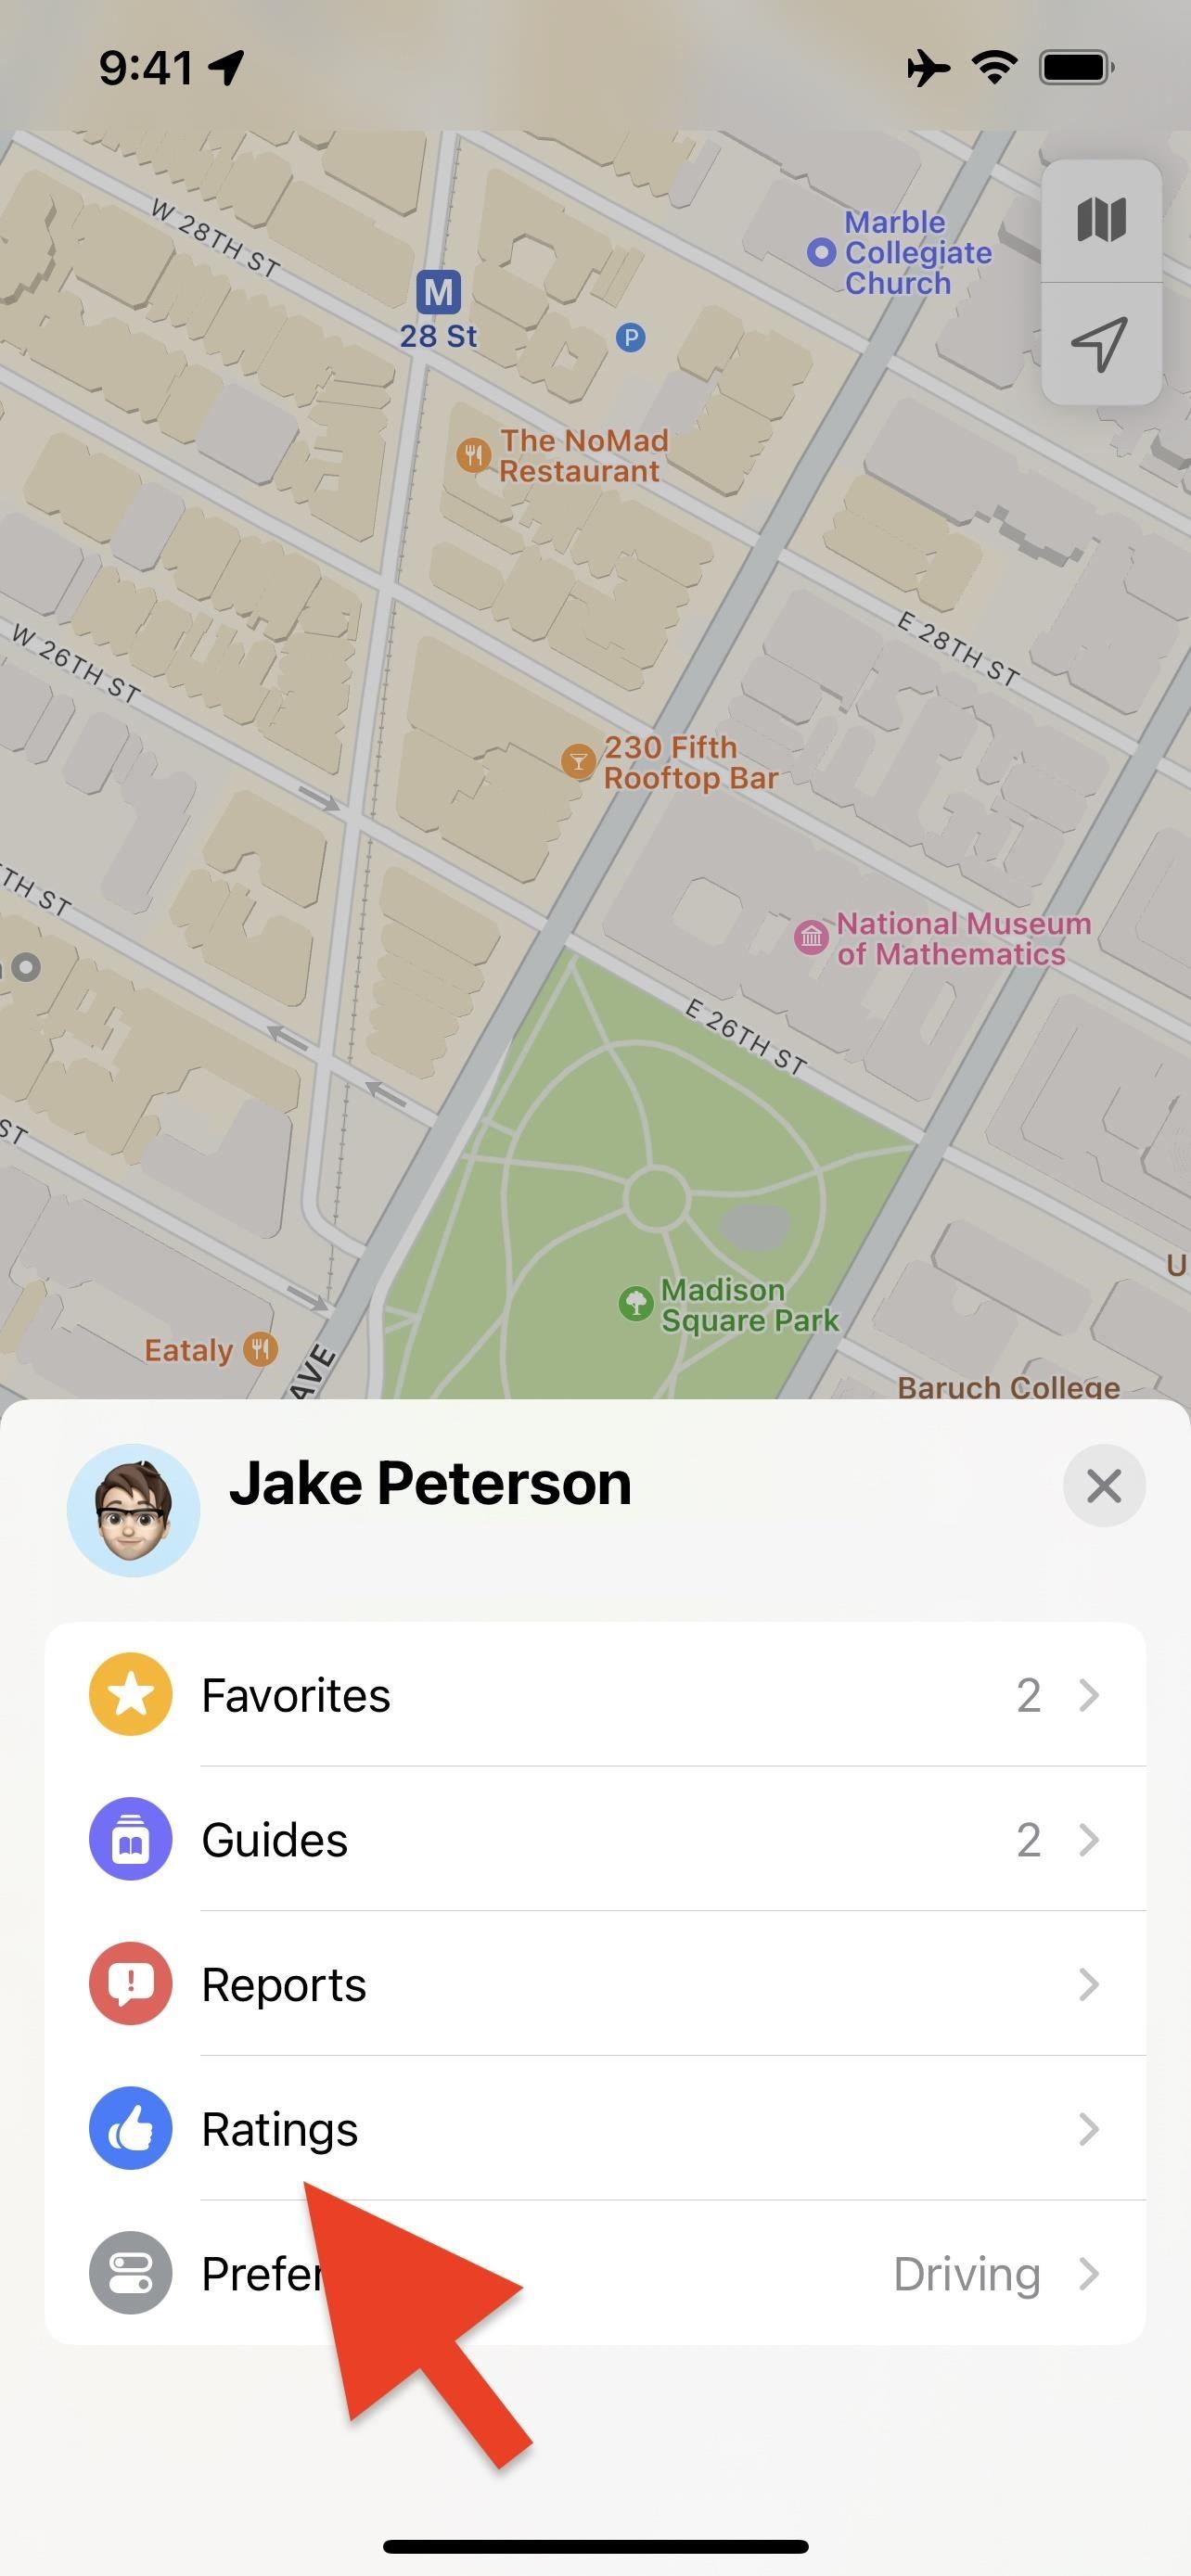 You Can Rate U.S. Businesses in iOS 15's Apple Maps to Remember What You Liked